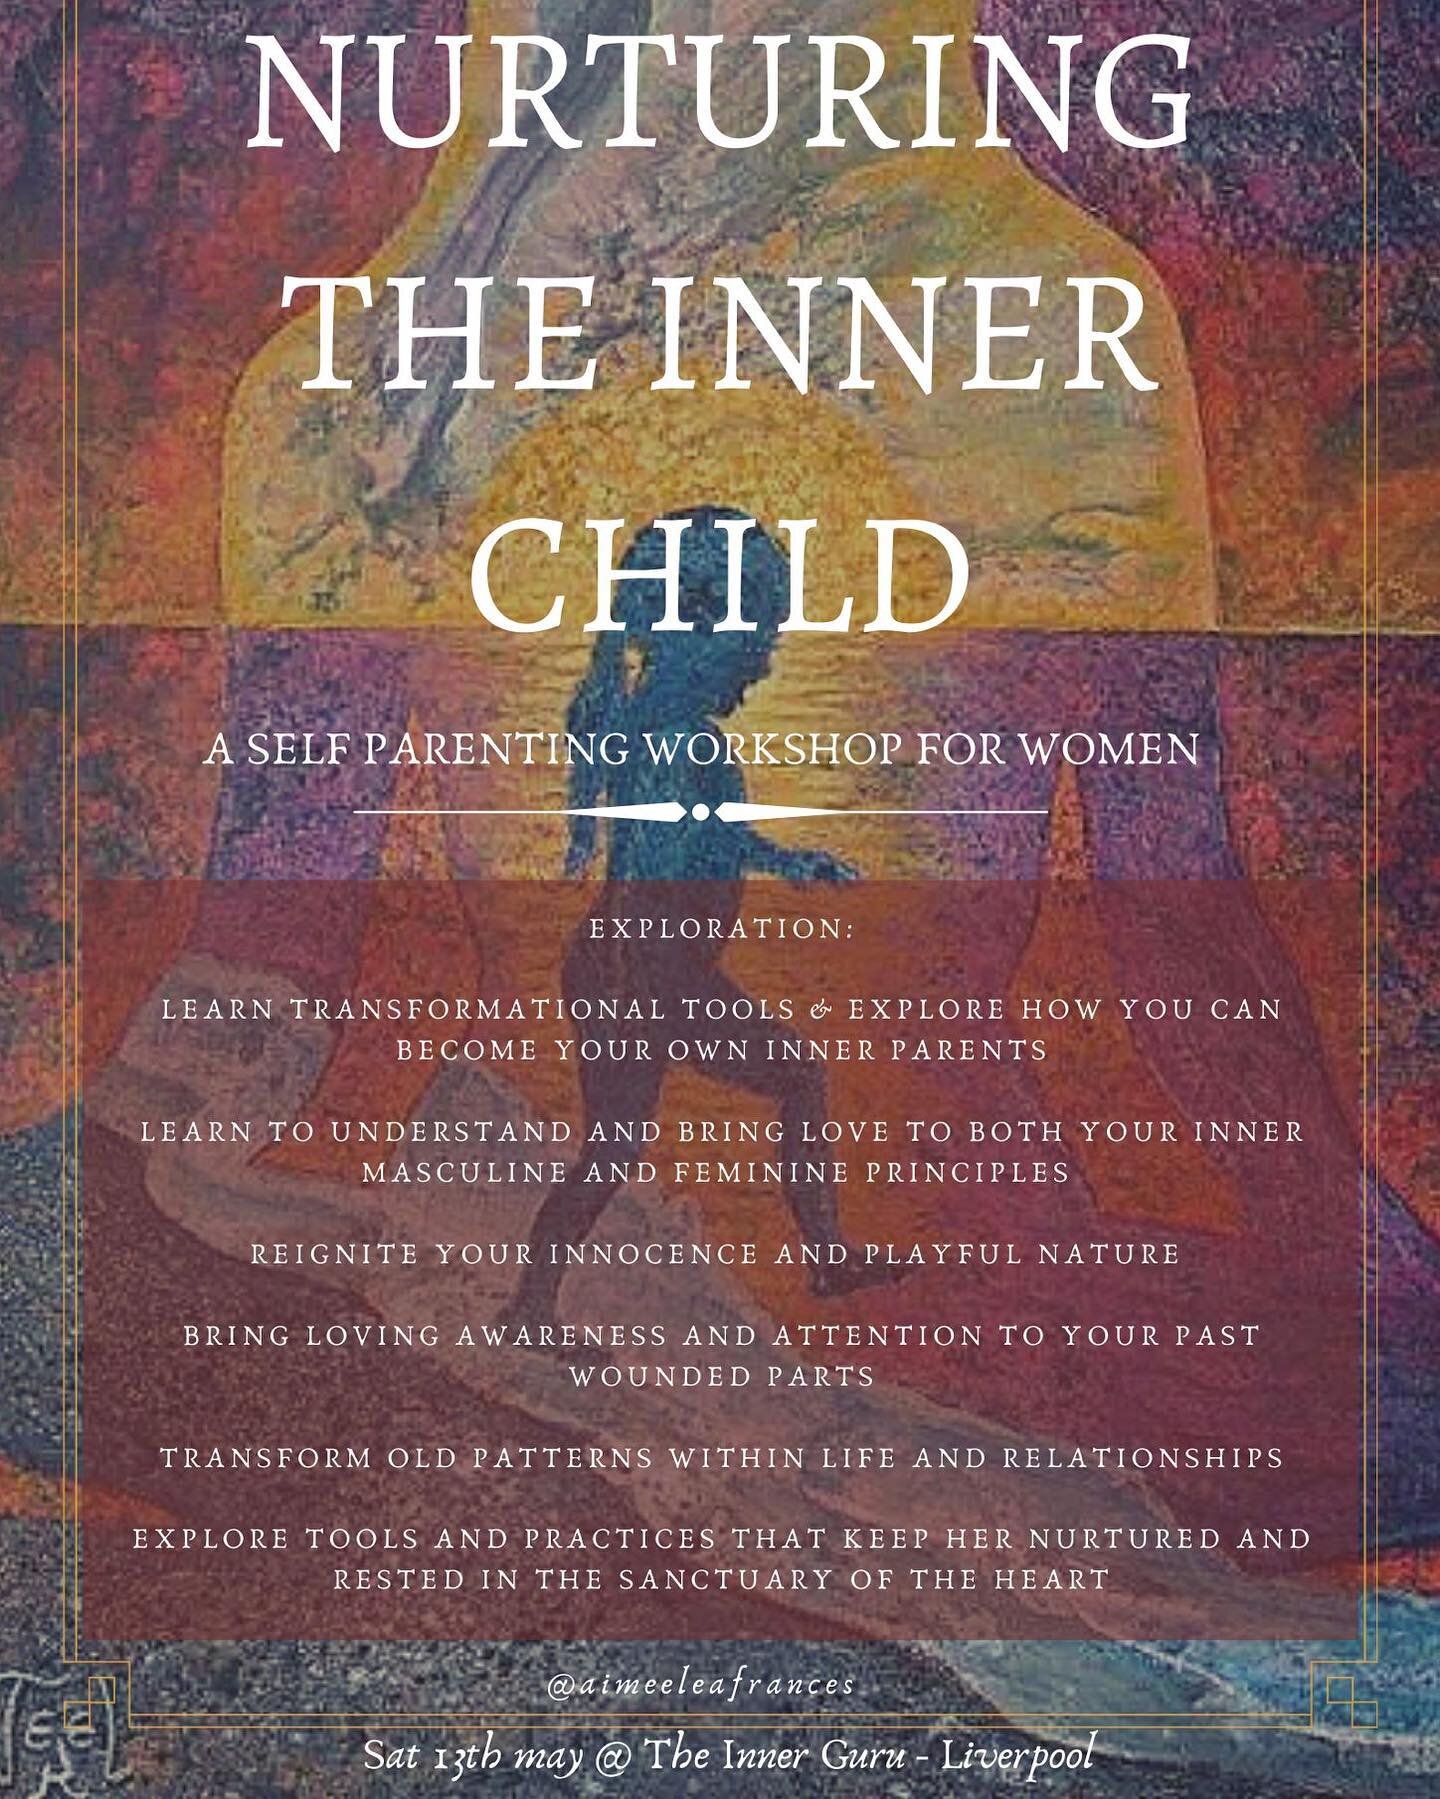 NURTURING THE INNER CHILD - The Gateway of Self Parenting. 

This retreat is for you if you are hearing the call to:

-Learn transformational tools &amp; explore how you can become your own inner parents

-Learn to understand and bring love to both y